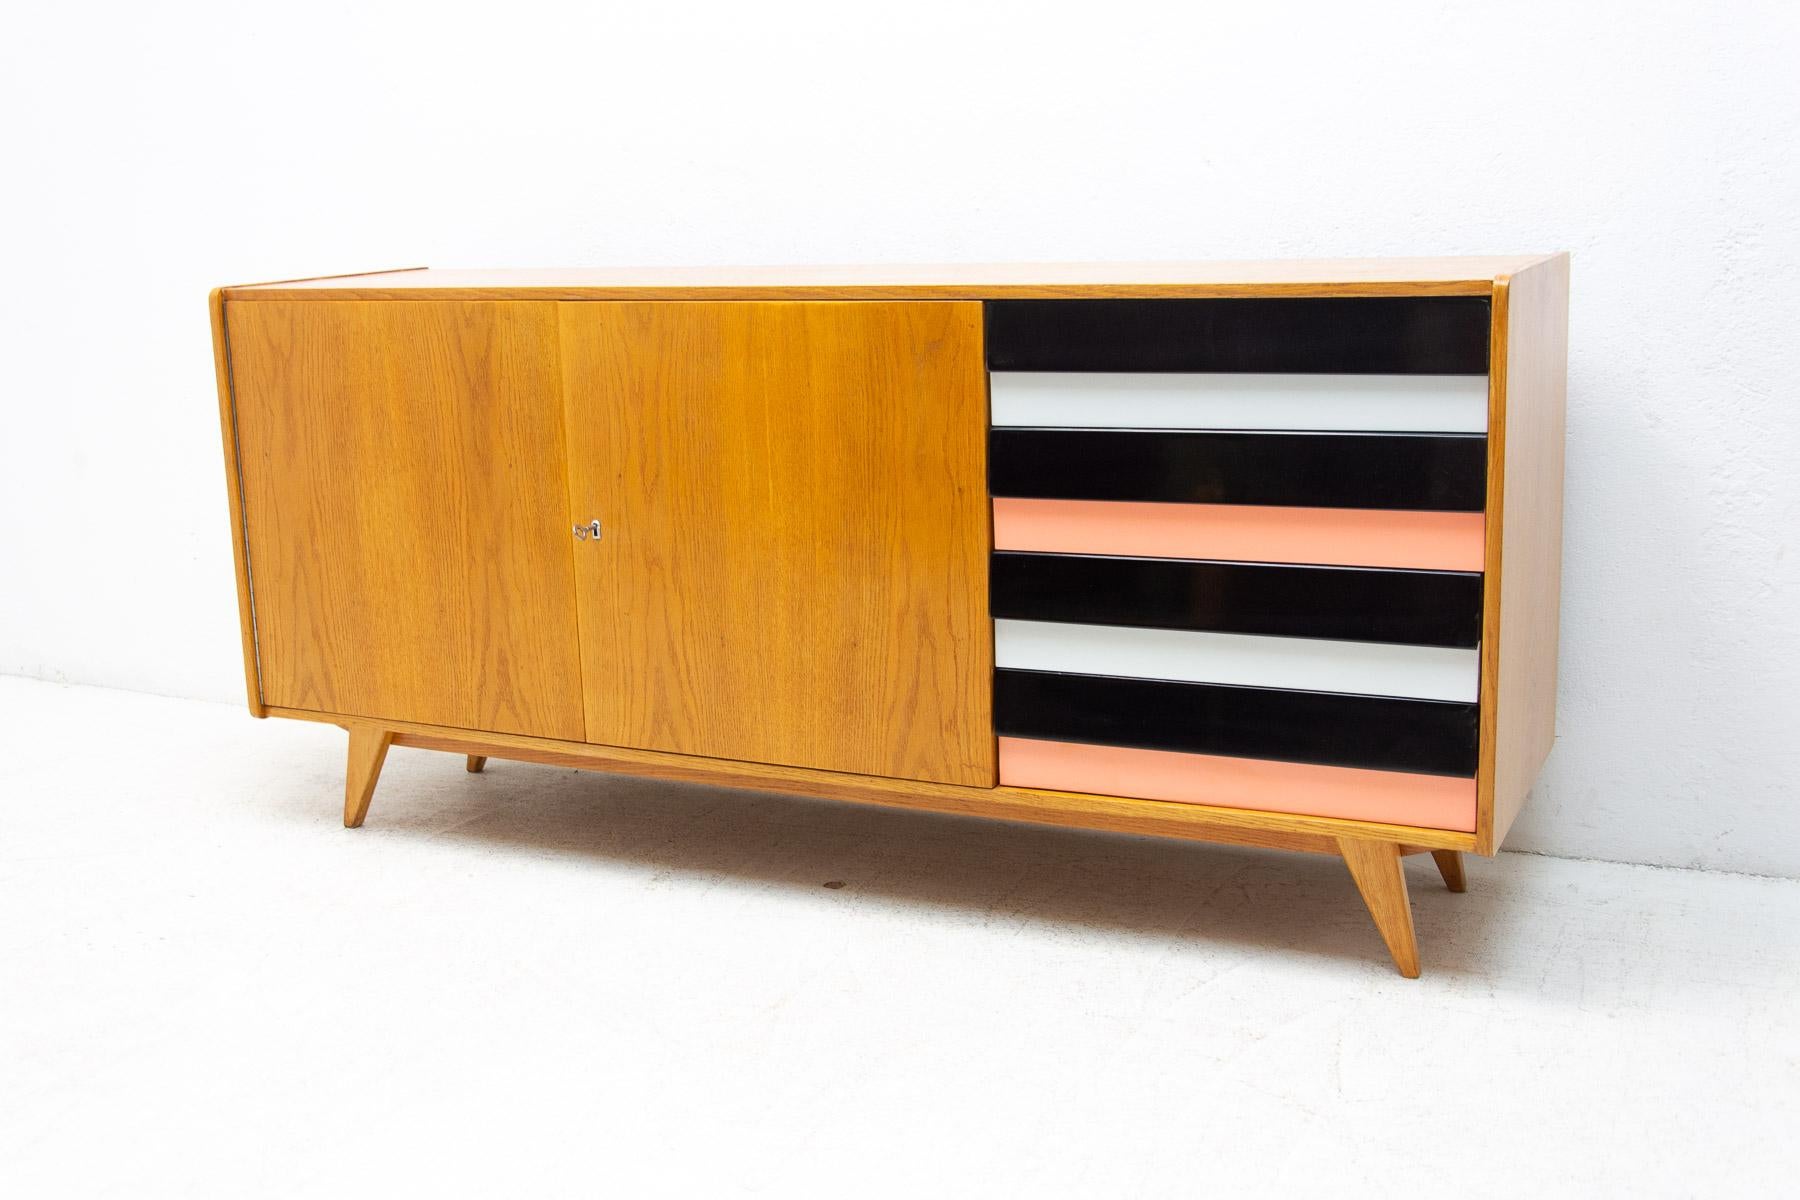 A popular vintage sideboard from the 1960s. It was designed by Jiri Jiroutek for Interier Praha. It features a Beechwood, plywood, colored lacquered drawers. In very good condition, fully renovated.

Measures: Height: 76 cm, lenght: 165 cm, depth: